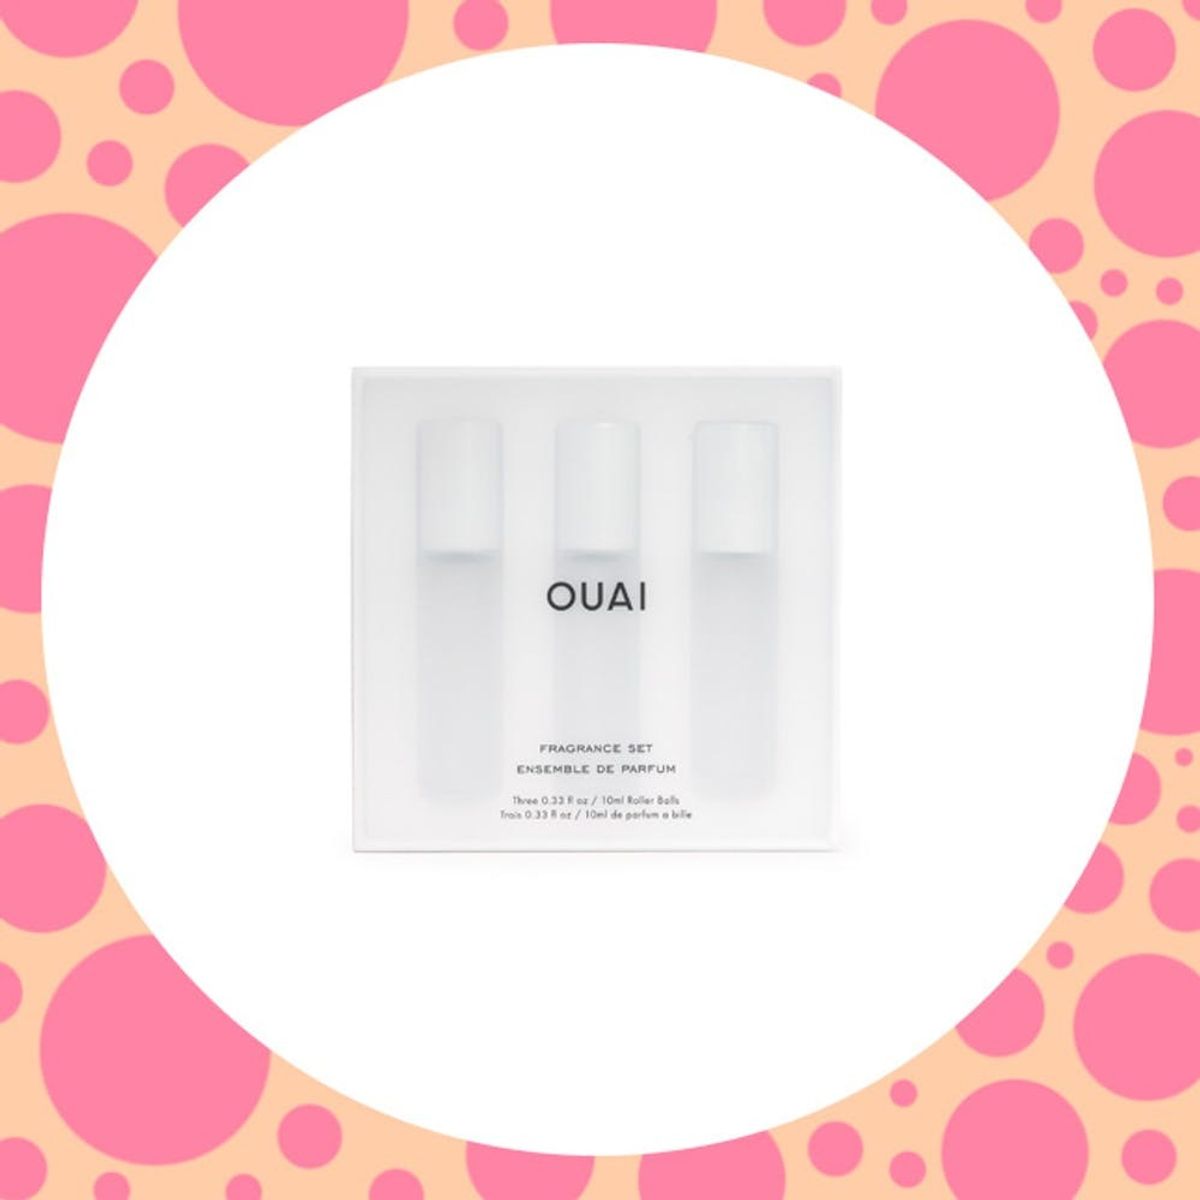 OUAI’s 3 New Products Have Nothing to Do With Hair